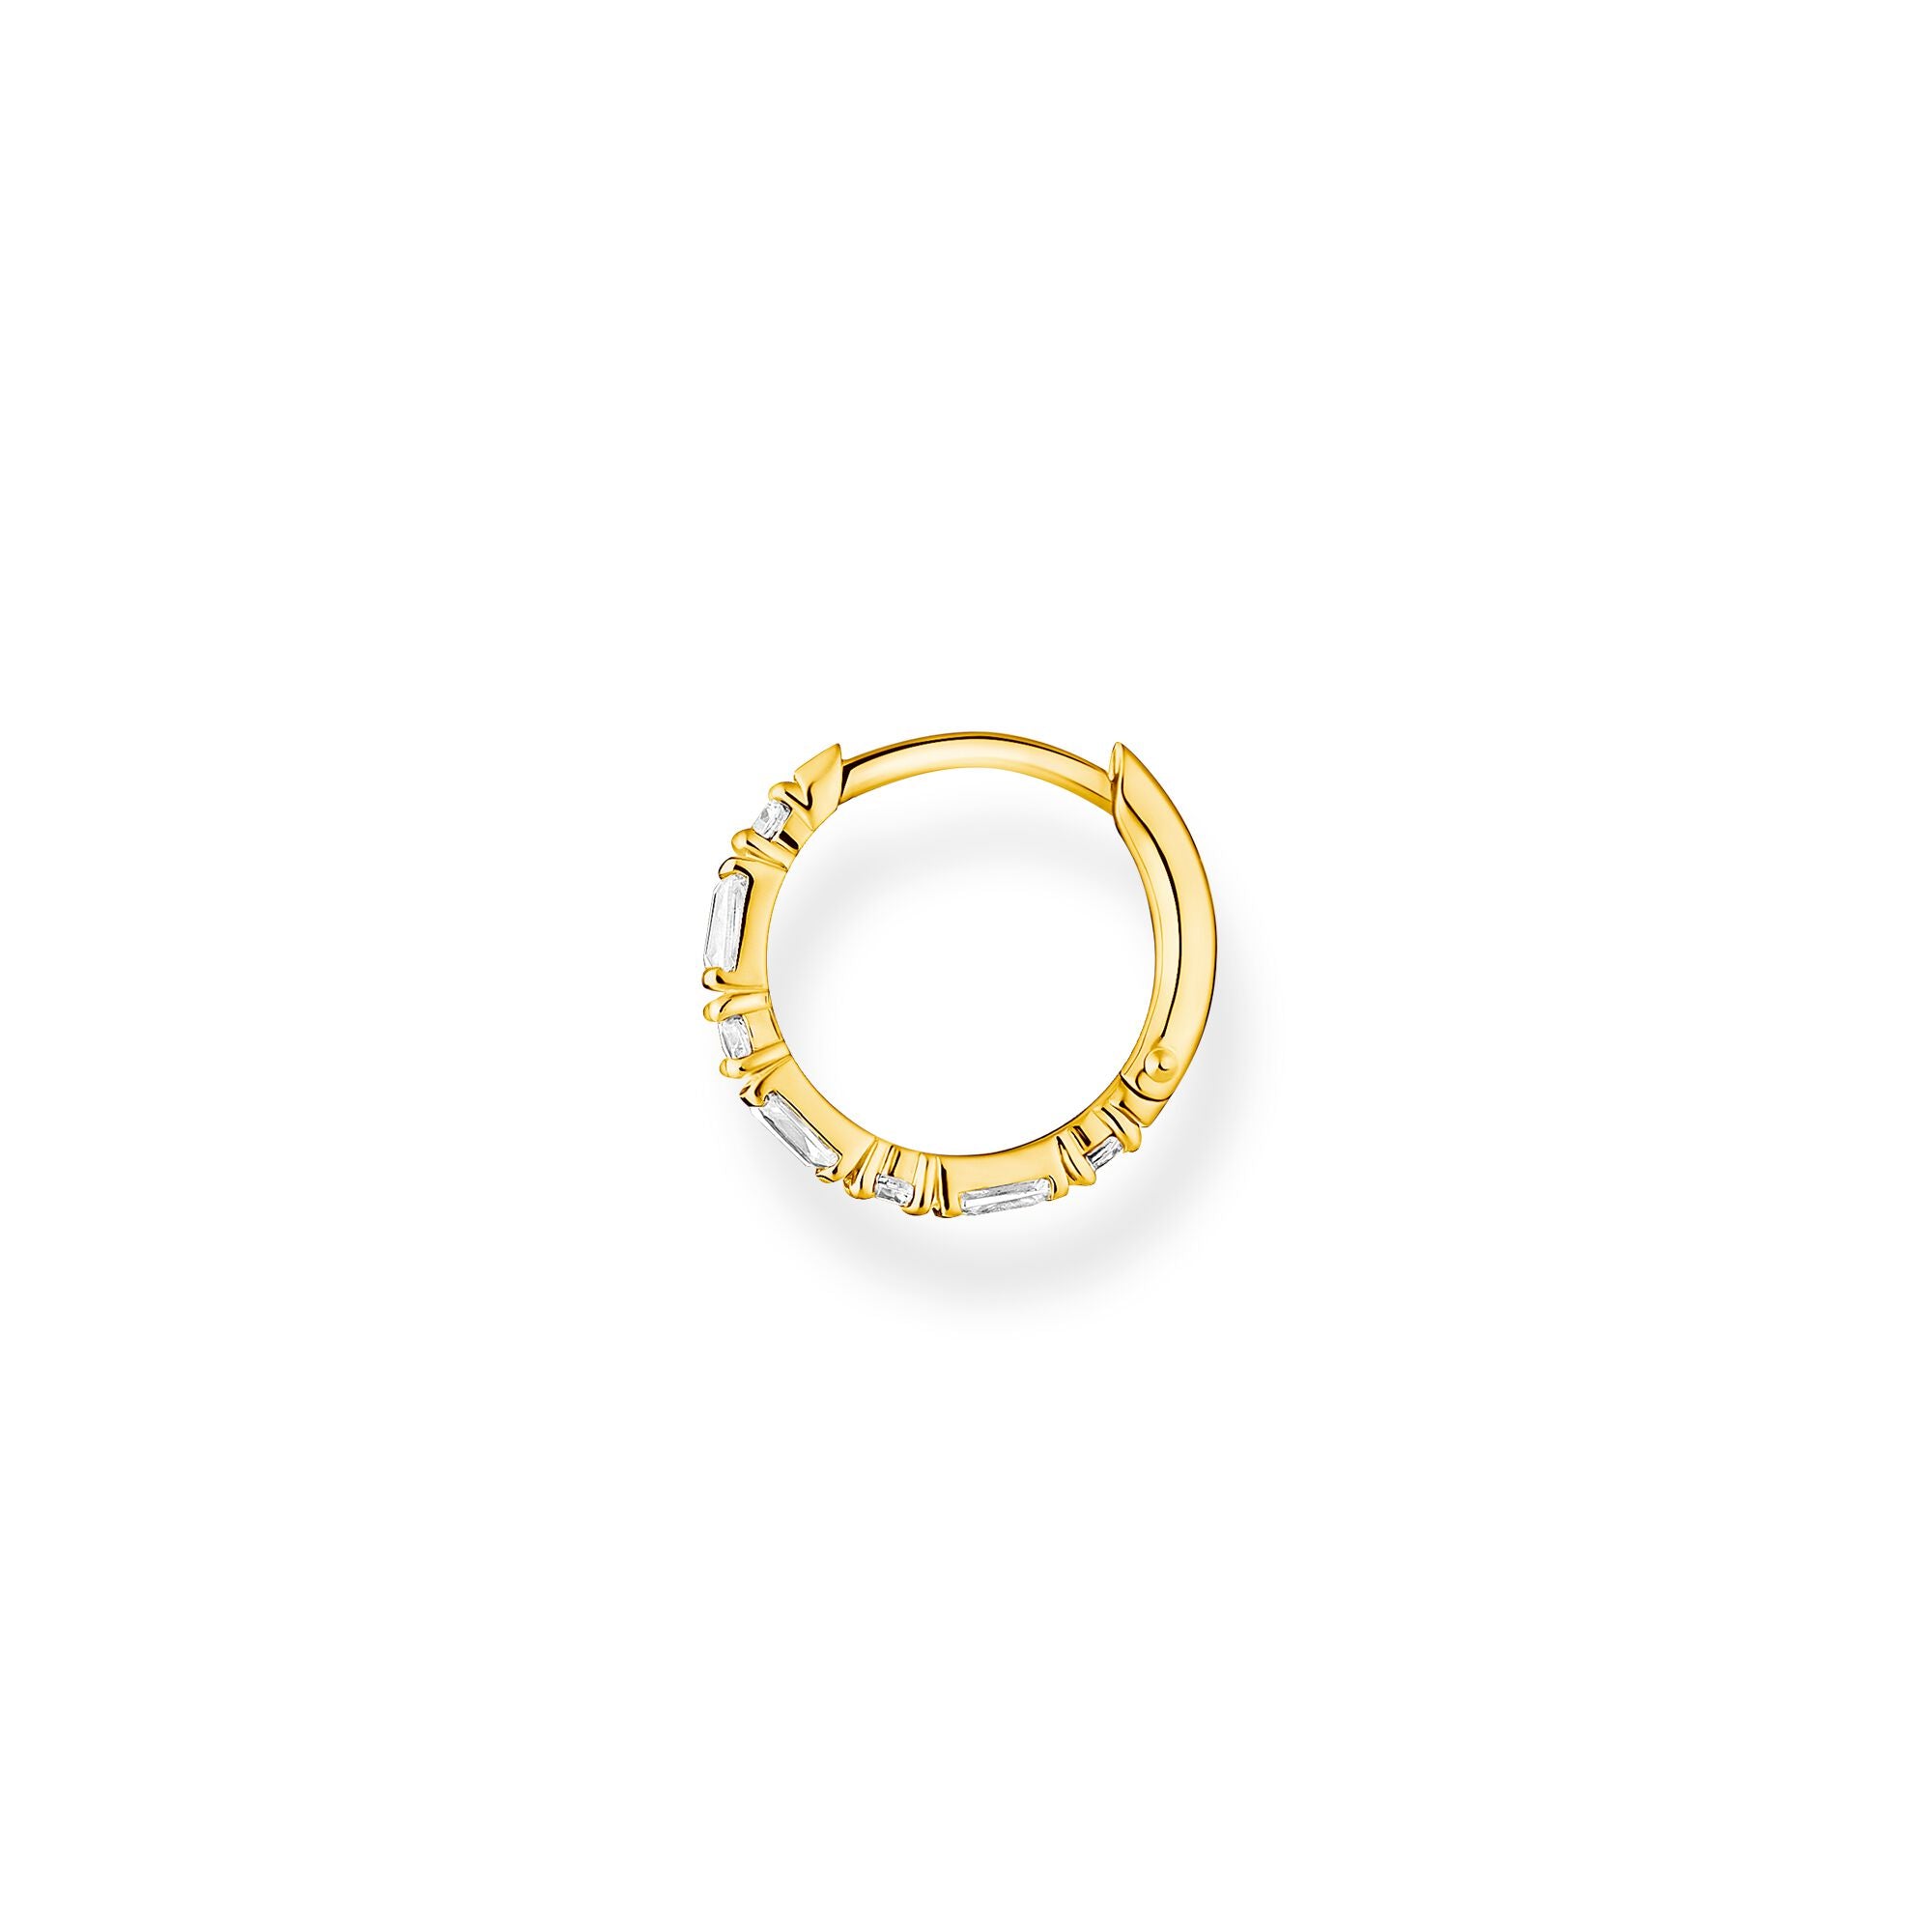 Thomas Sabo 18k yellow gold plated sterling silver and white baguette stones, clicker style single hoop earring